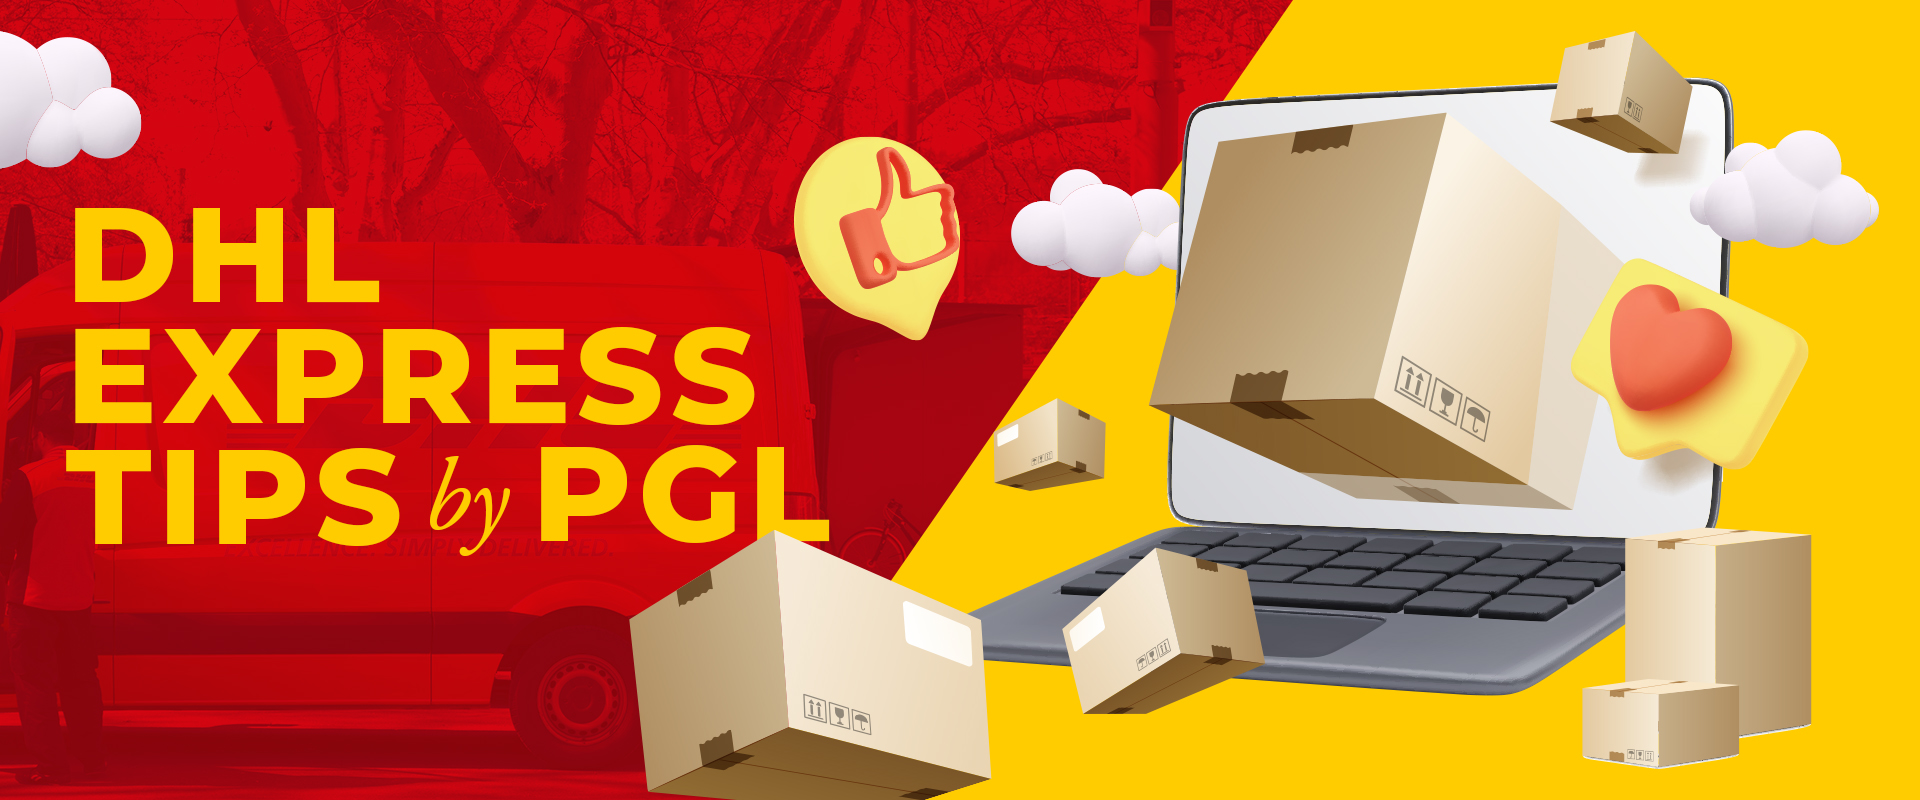 DHL Express partnered with PGL